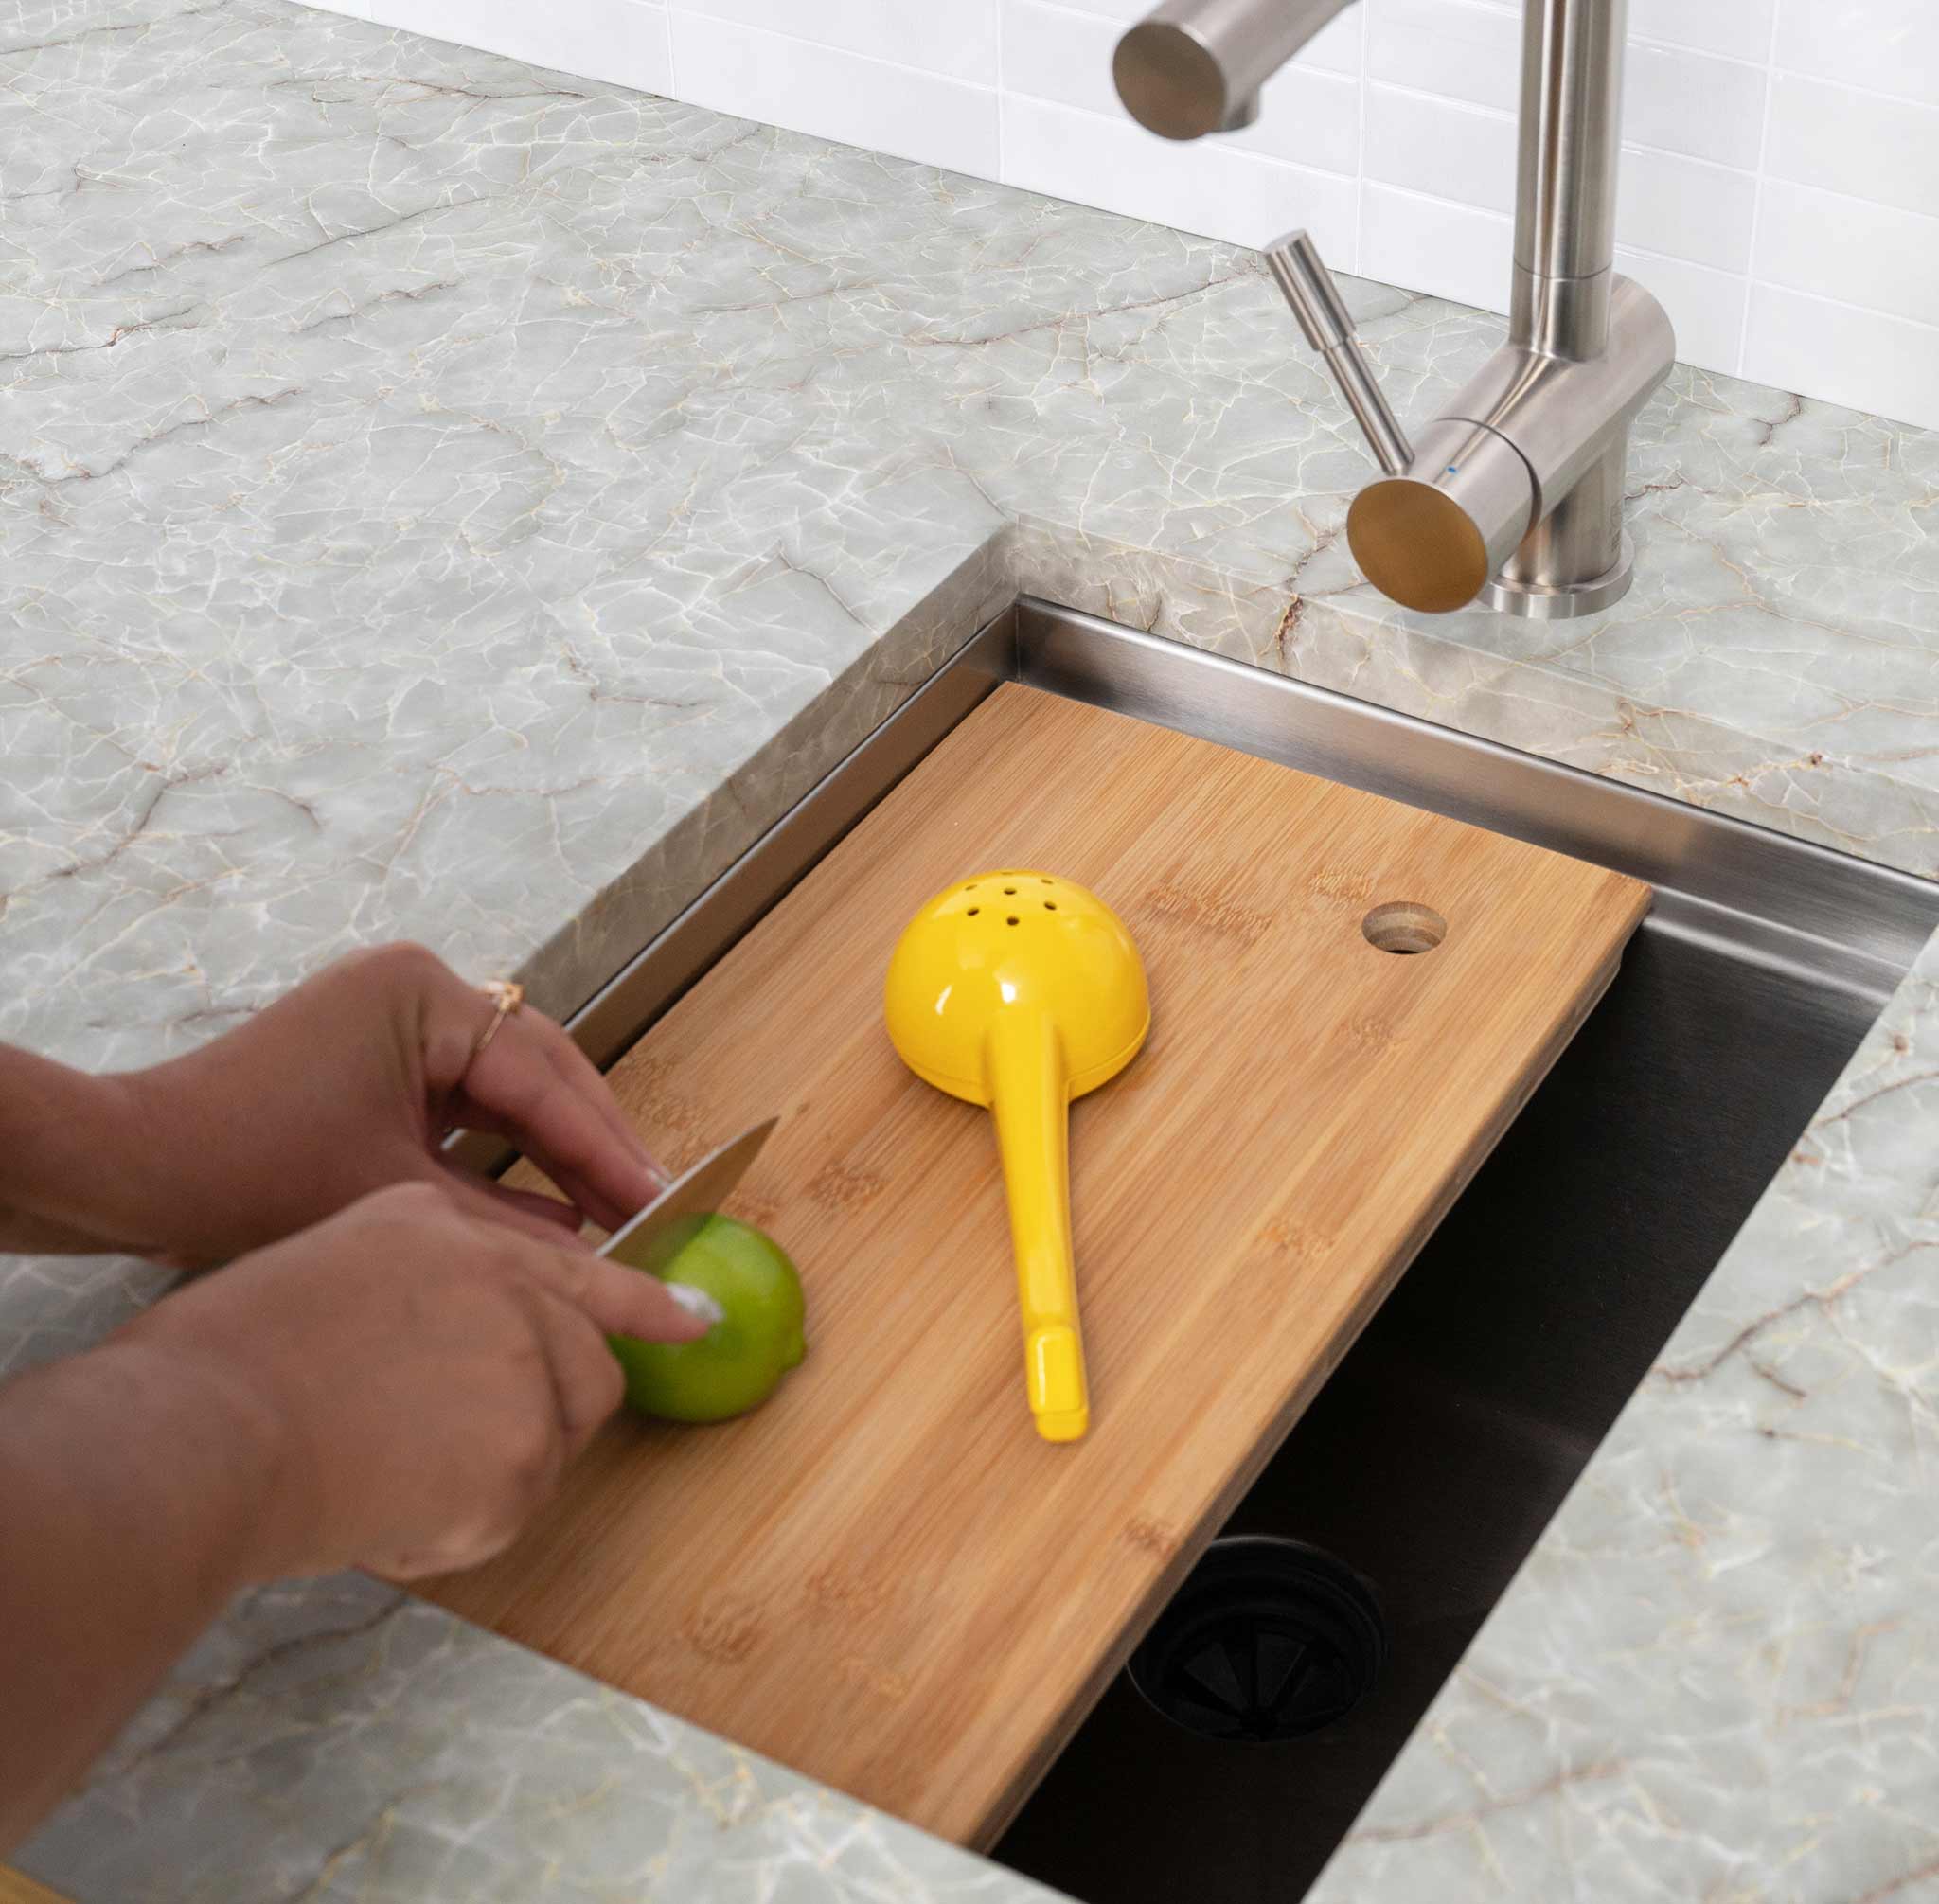 The 10" bamboo prep cutting board from Create Good Sinks in a 15" Prep Workstation Sink